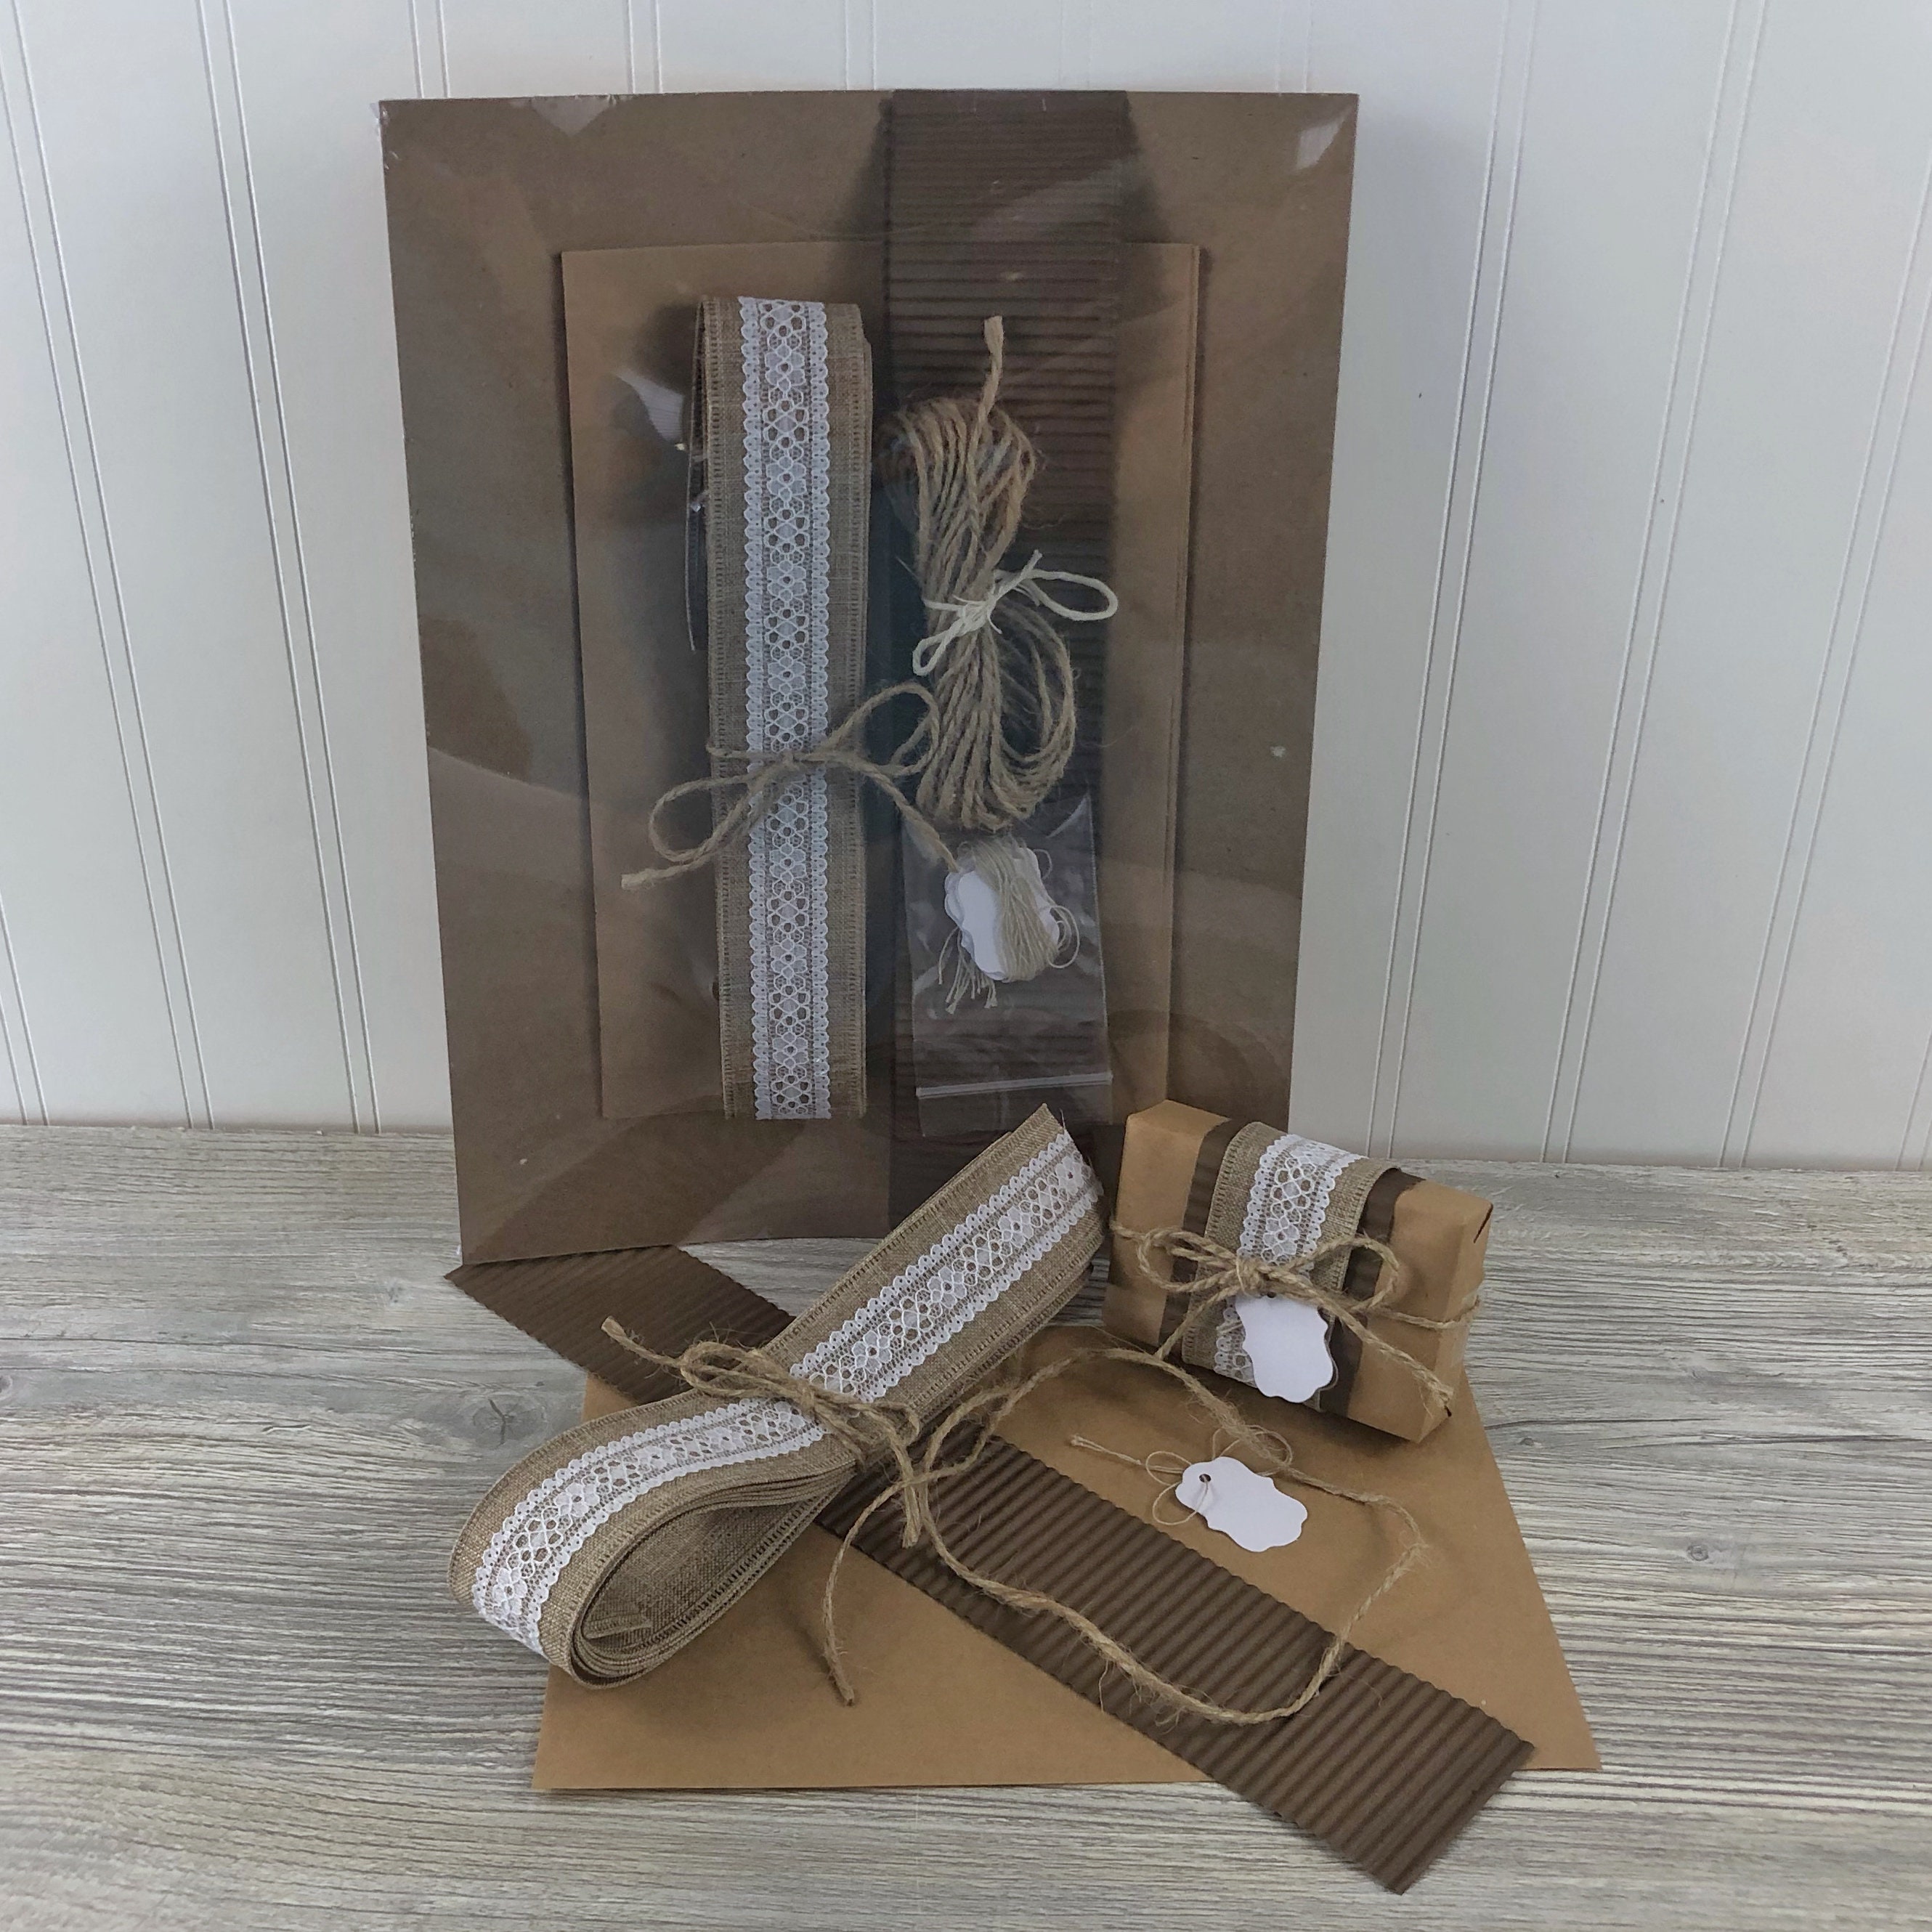 Soap Packaging, DIY Soap Wrapper Kit, Soap Making Supplies, Belly Bands,  Soap Wraps, Shower Favor Ideas, Rustic Wedding, Cute Packaging 